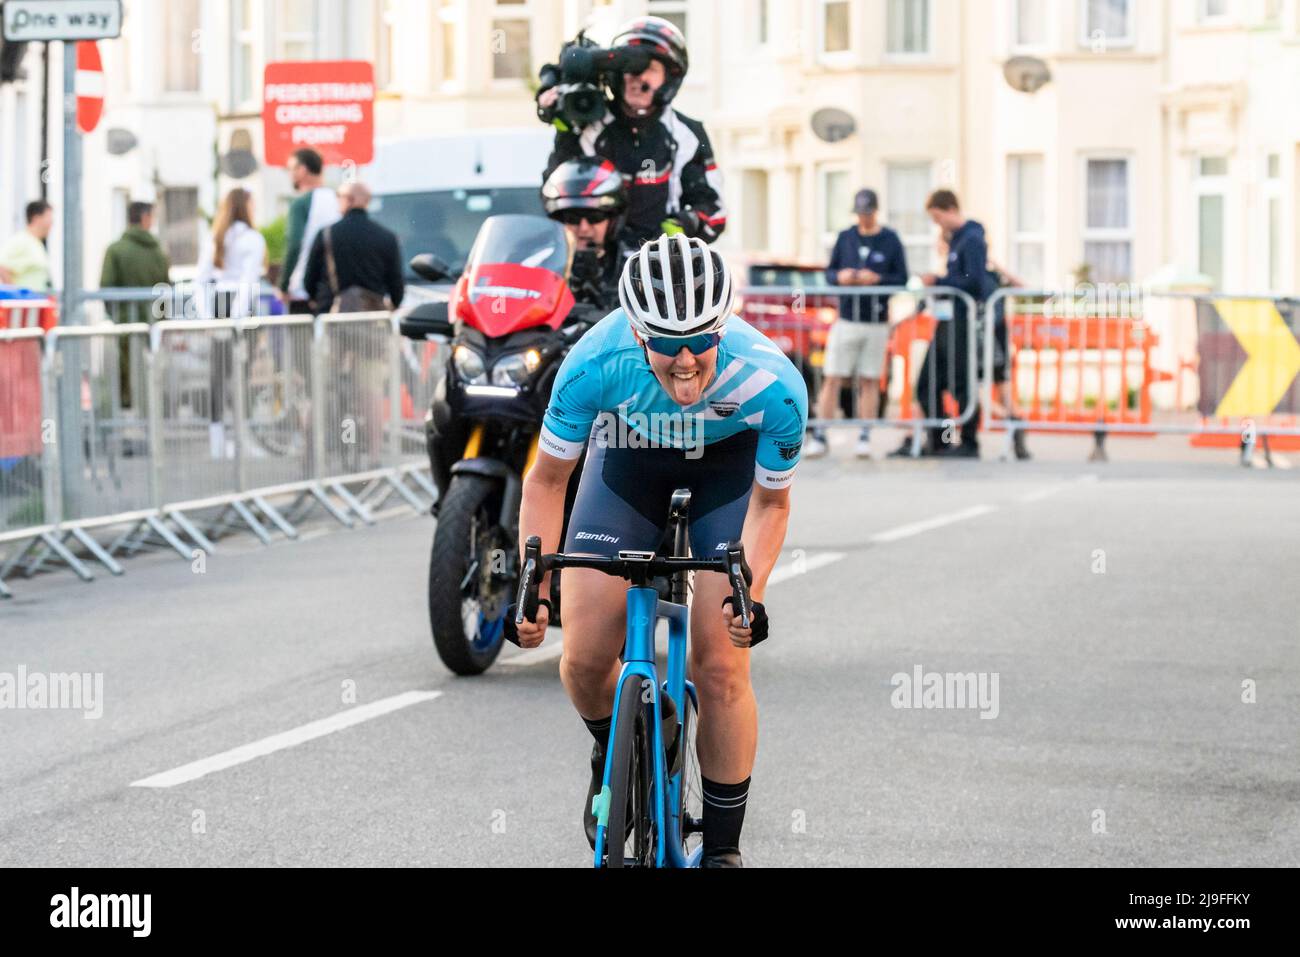 Sammie Stuart of LDN Brother leading and showing off, racing in the Sportsbreaks Tour Series cycle race round five in Clacton on Sea, Essex, UK Stock Photo